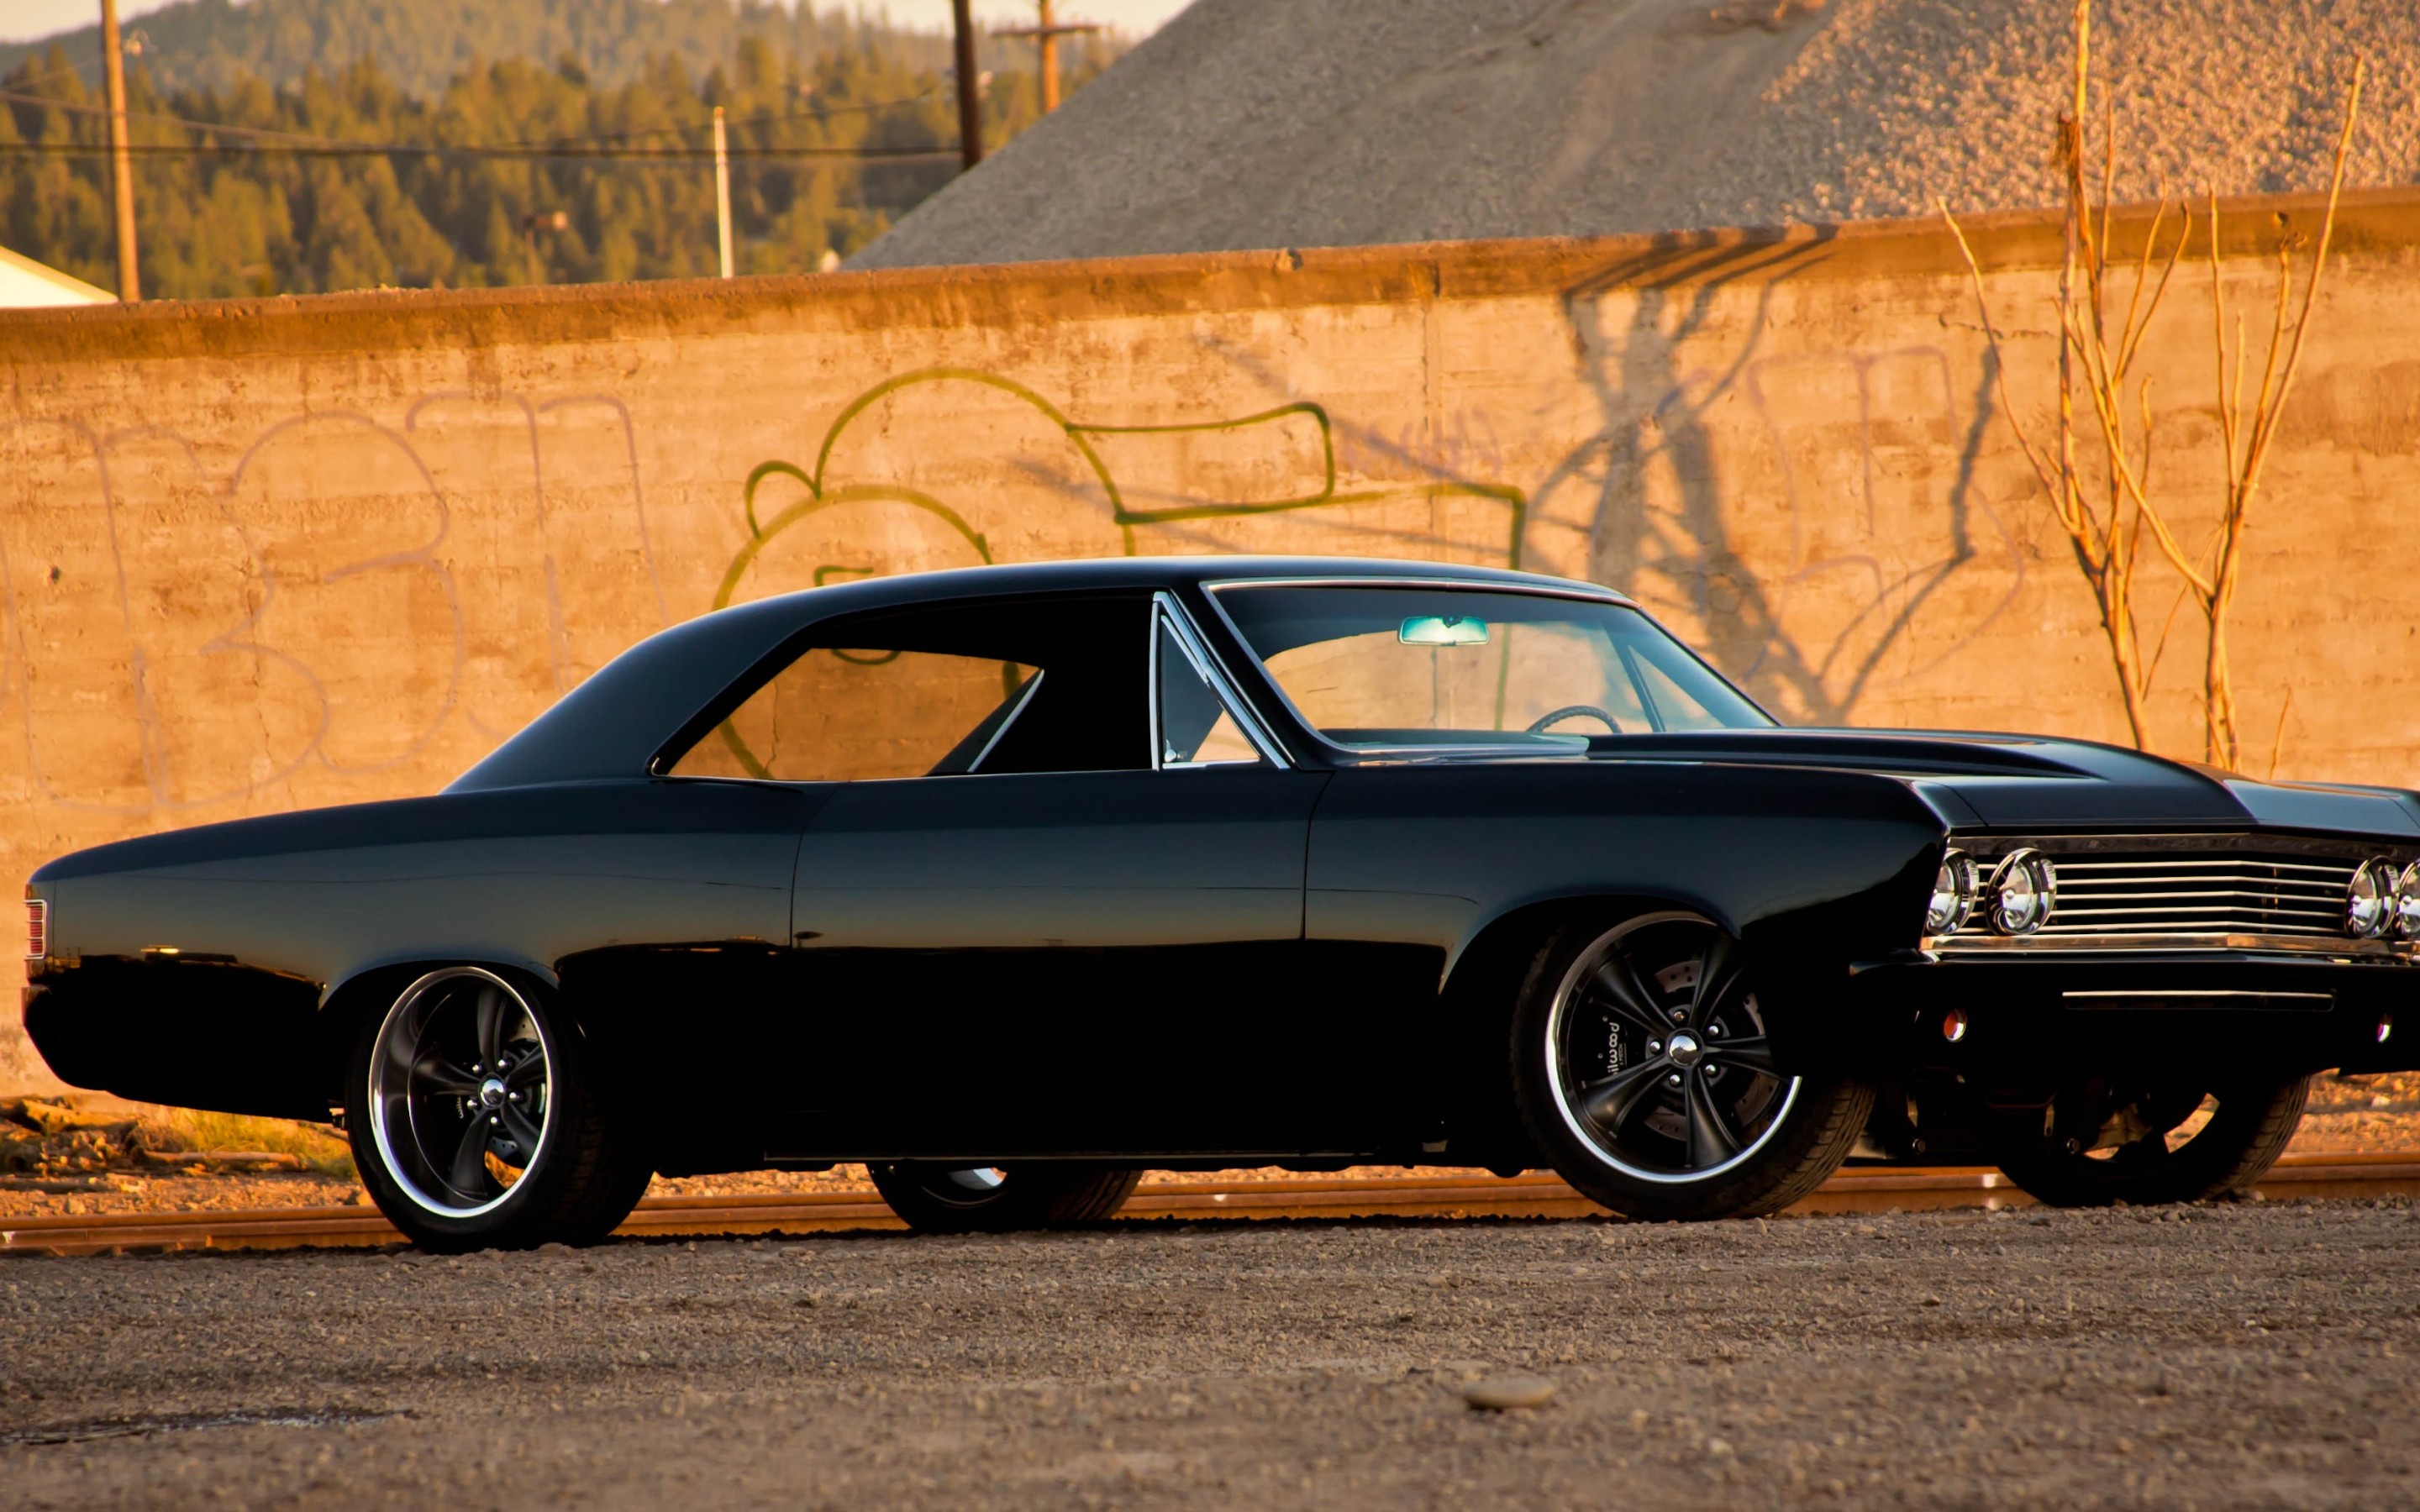 chevrolet, Chevelle, Ss, Vehicles, Cars, Auto, Retro, Classic, Muscle, Tuning, Hot, Rod, Wheels, Stance, Black Wallpaper